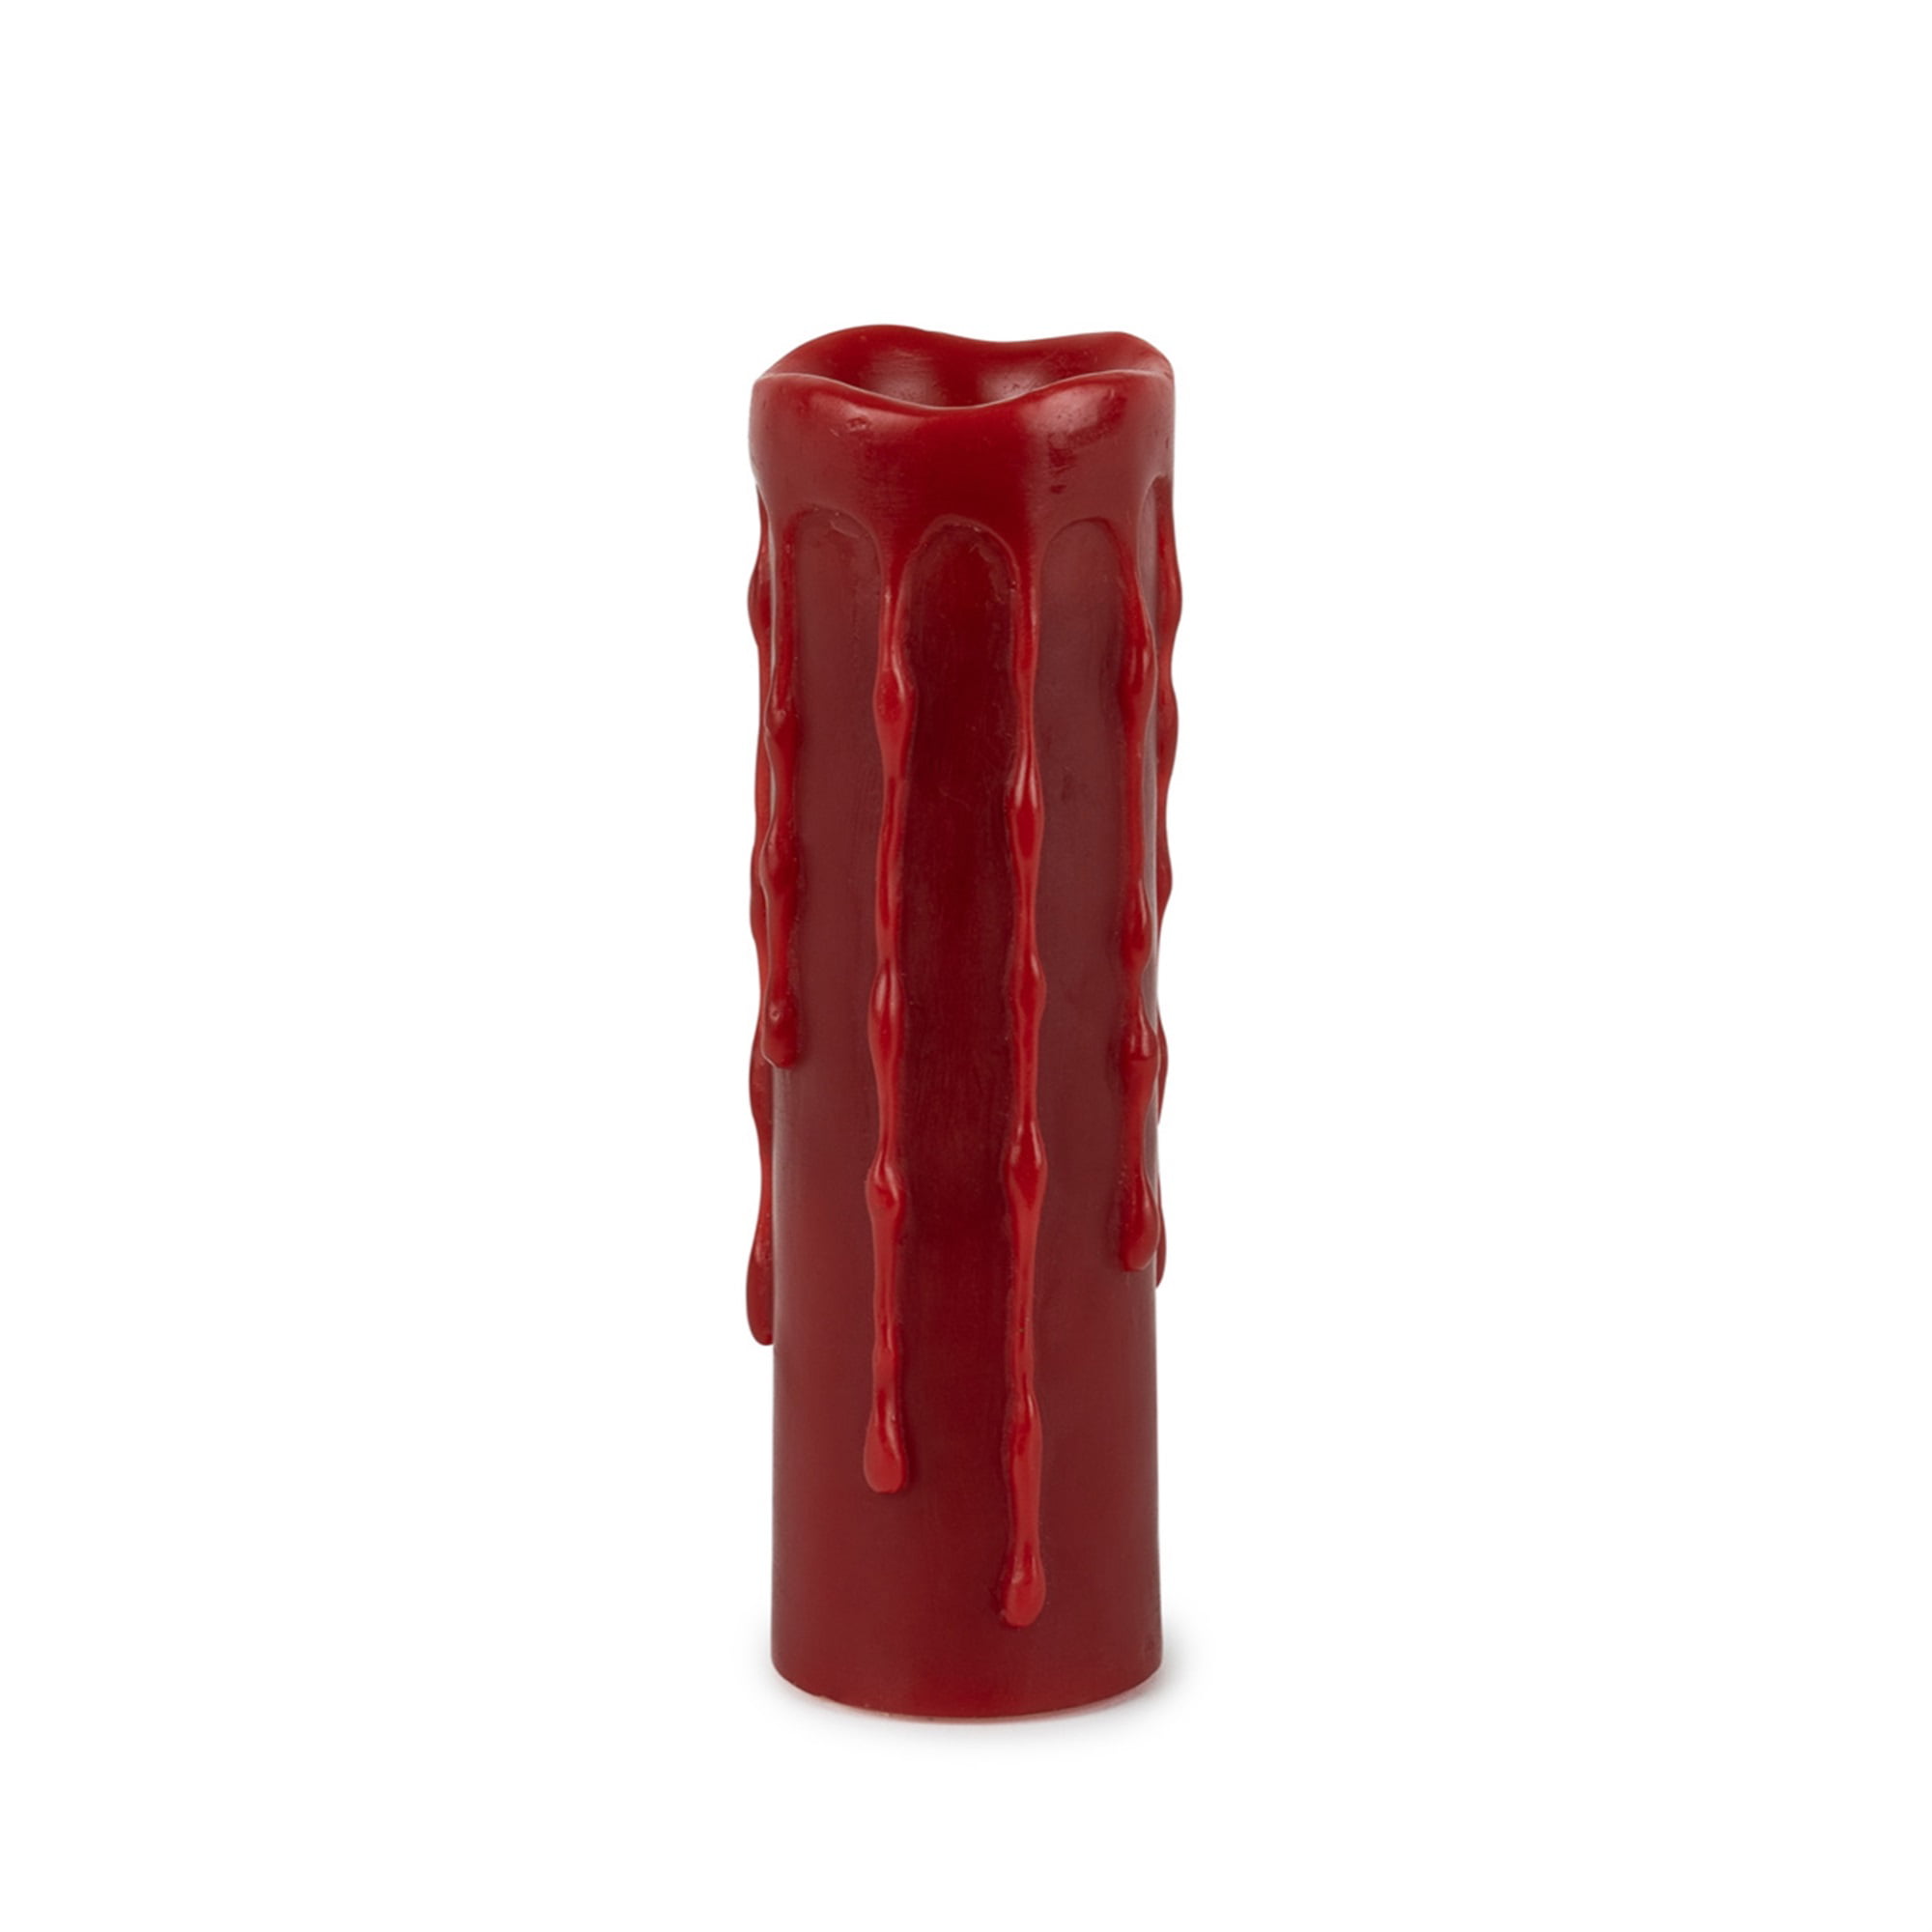 LED Wax Dripping Pillar Candle with remote and 4 and 8 Hour Timer (Set of 2) 1.75"Dx6"H Wax/Plastic